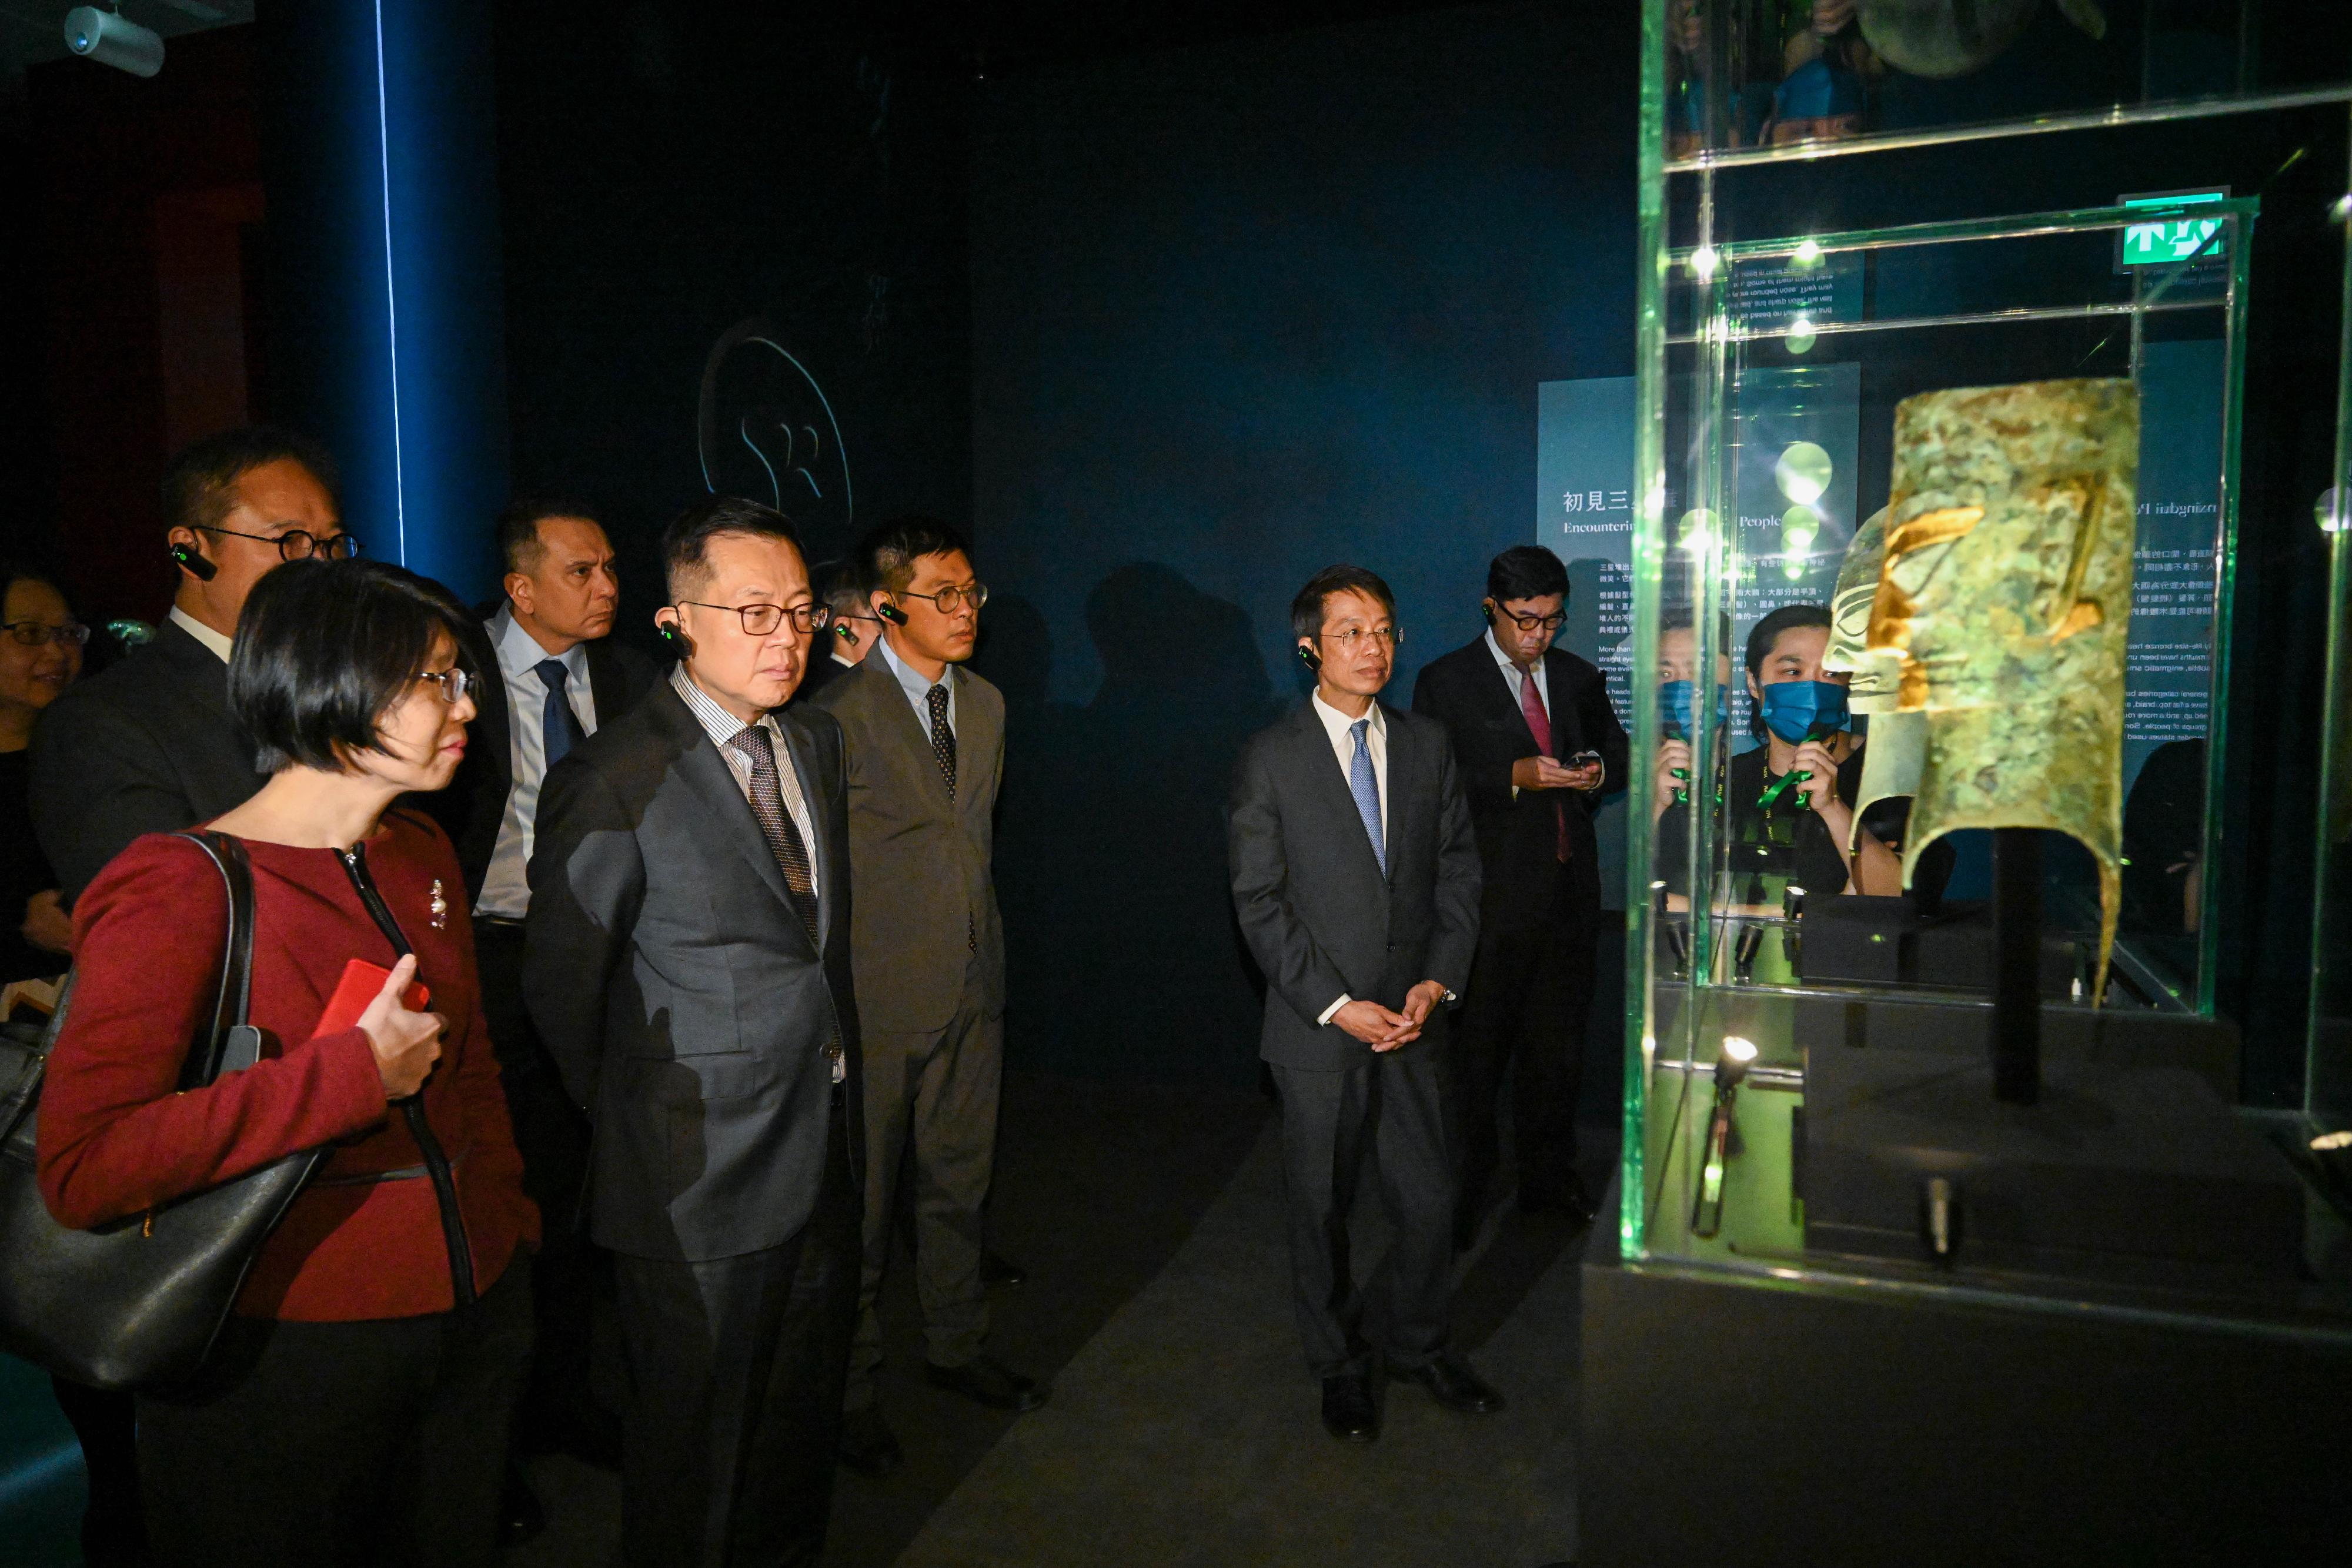 The 7th Singapore-Hong Kong Permanent Secretaries Exchange Programme was held in Hong Kong for two consecutive days starting yesterday (November 23). The delegation led by the Head of Civil Service of Singapore, Mr Leo Yip (front row, second left), visited the Hong Kong Palace Museum to learn about Hong Kong's cultural promotion efforts yesterday evening. Photo shows the delegation viewing an artefact at the exhibition "Gazing at Sanxingdui: New Archaeological Discoveries in Sichuan". Looking on is the Permanent Secretary for the Civil Service, Mr Clement Leung (front row, fourth left). 